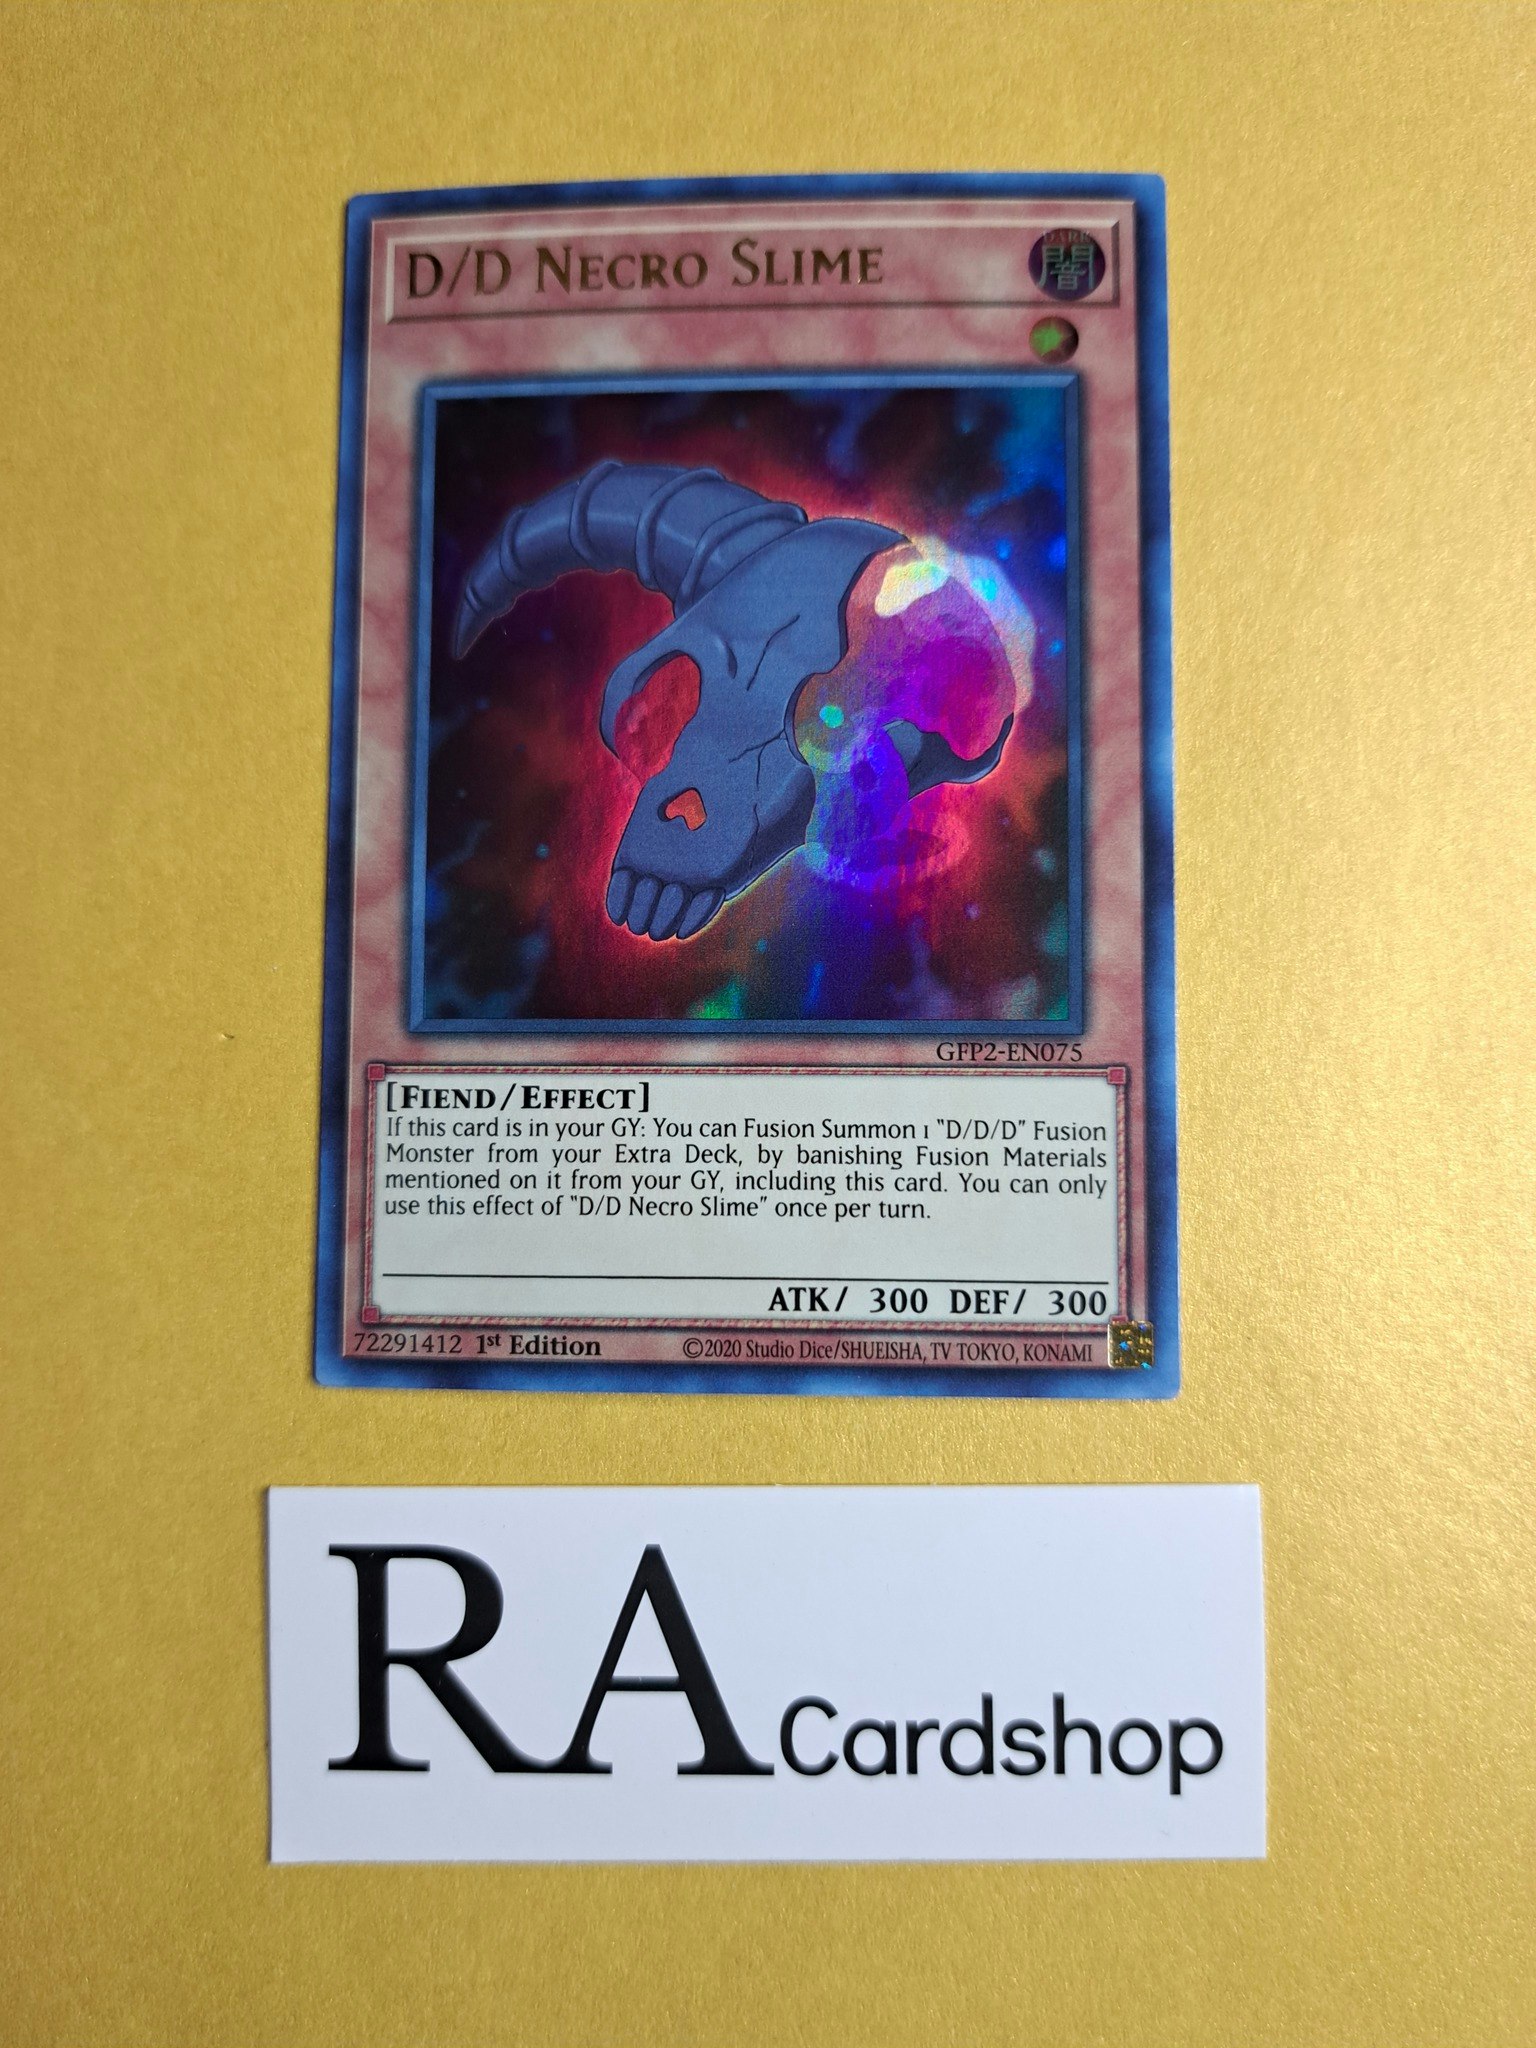 D/D Necro Slime 1st Edition EN075 Ghosts From the Past: The 2nd Haunting GFP2 Yu-Gi-Oh